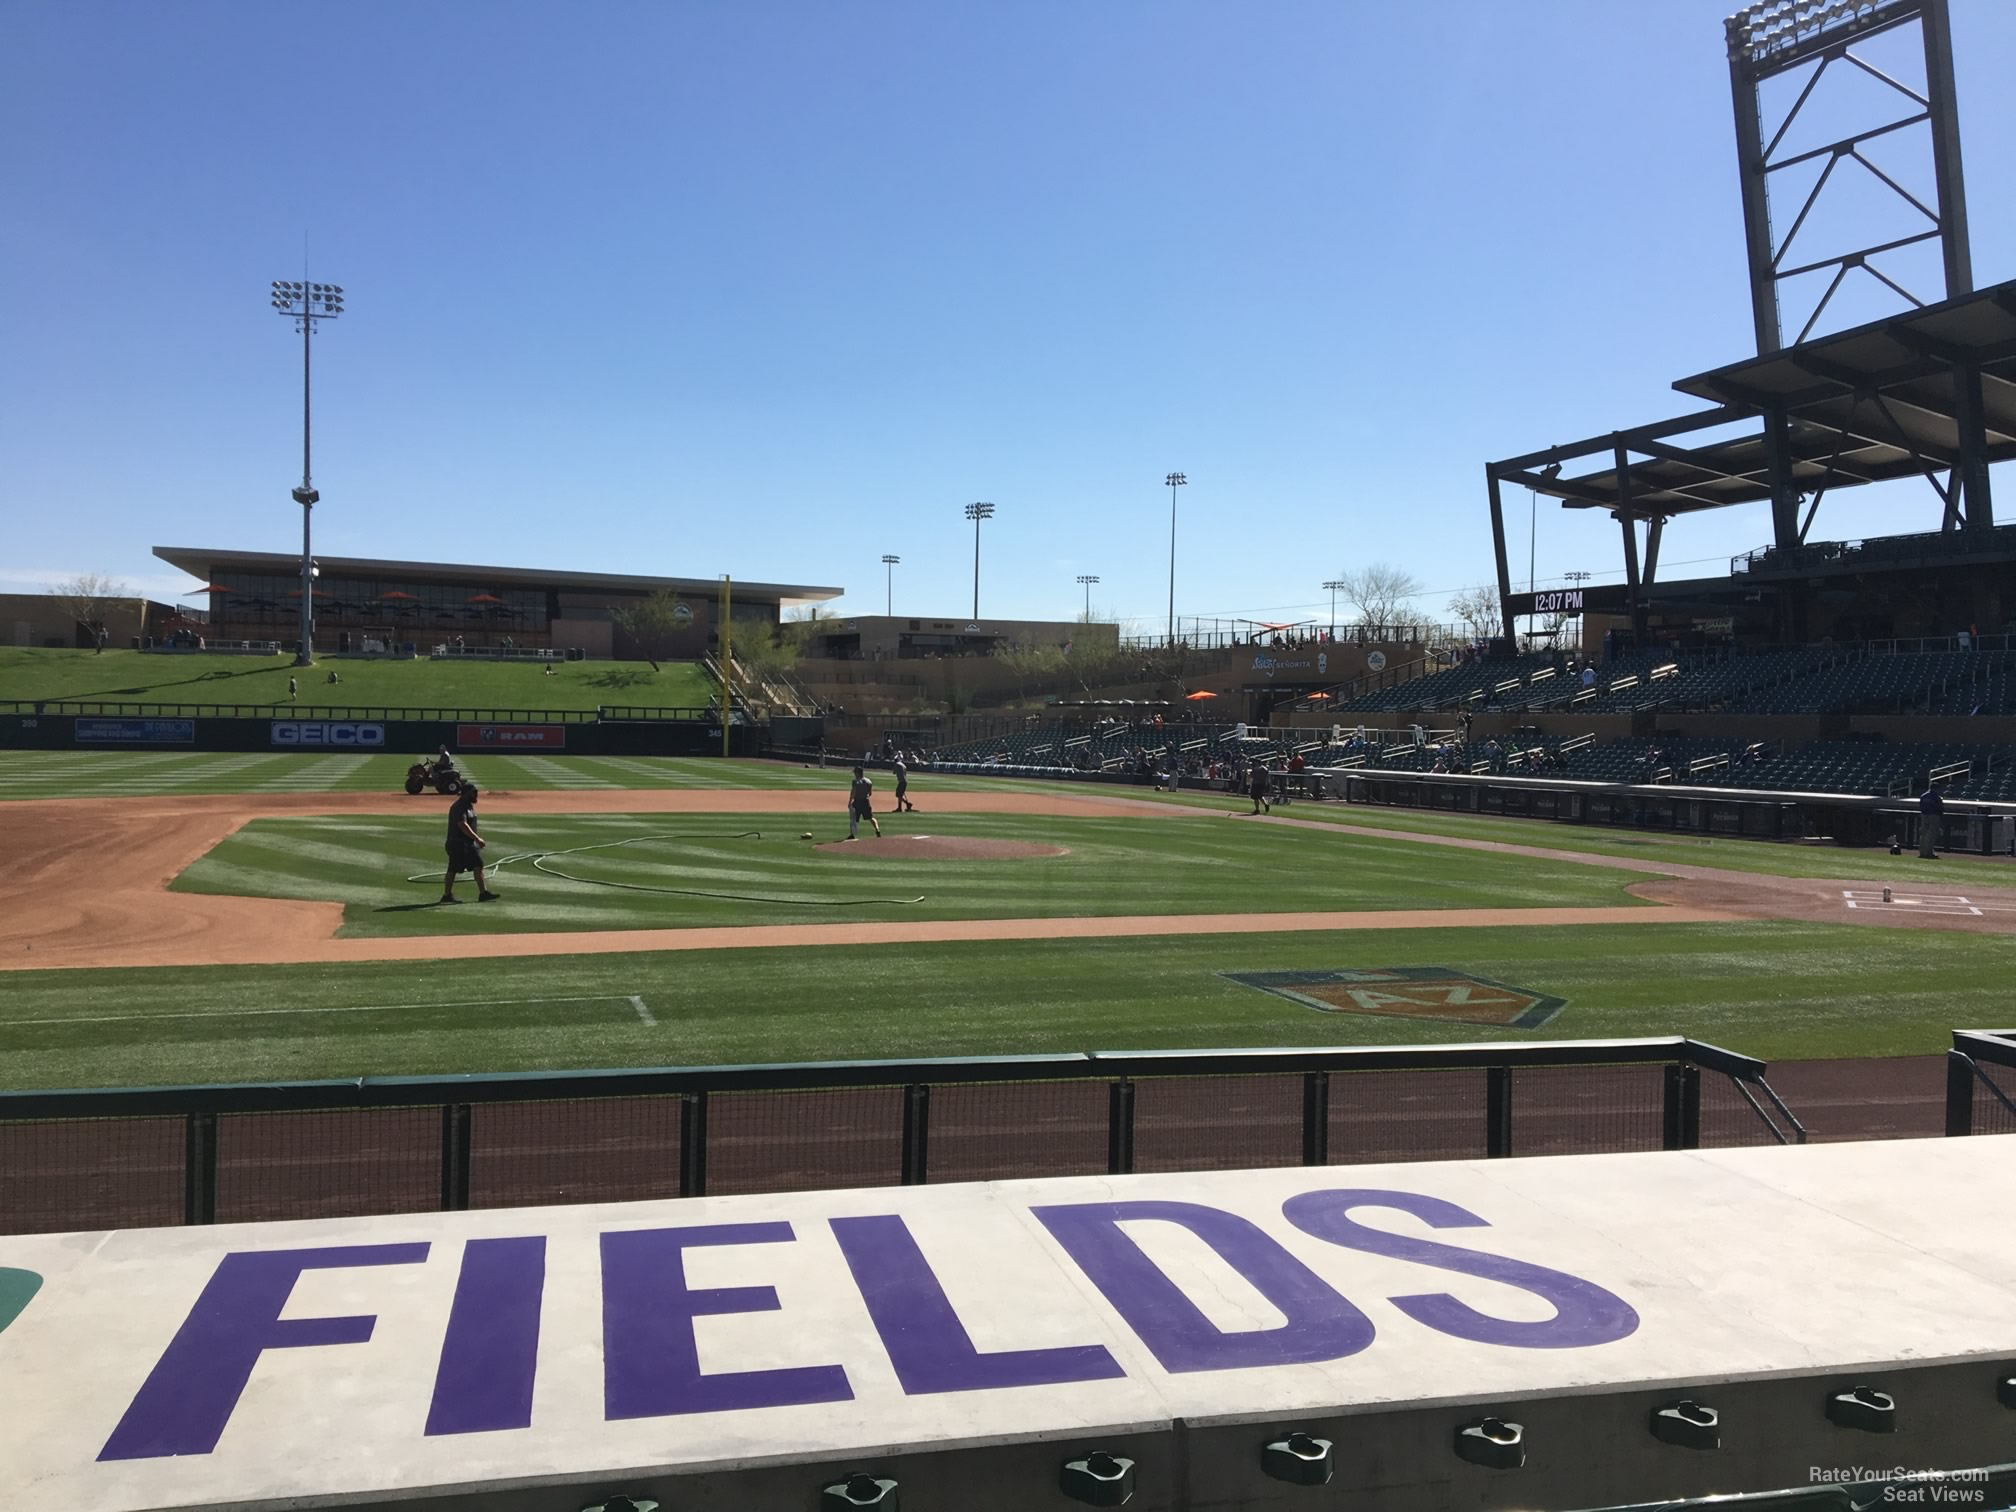 section 117, row 10 seat view  - salt river field at talking stick